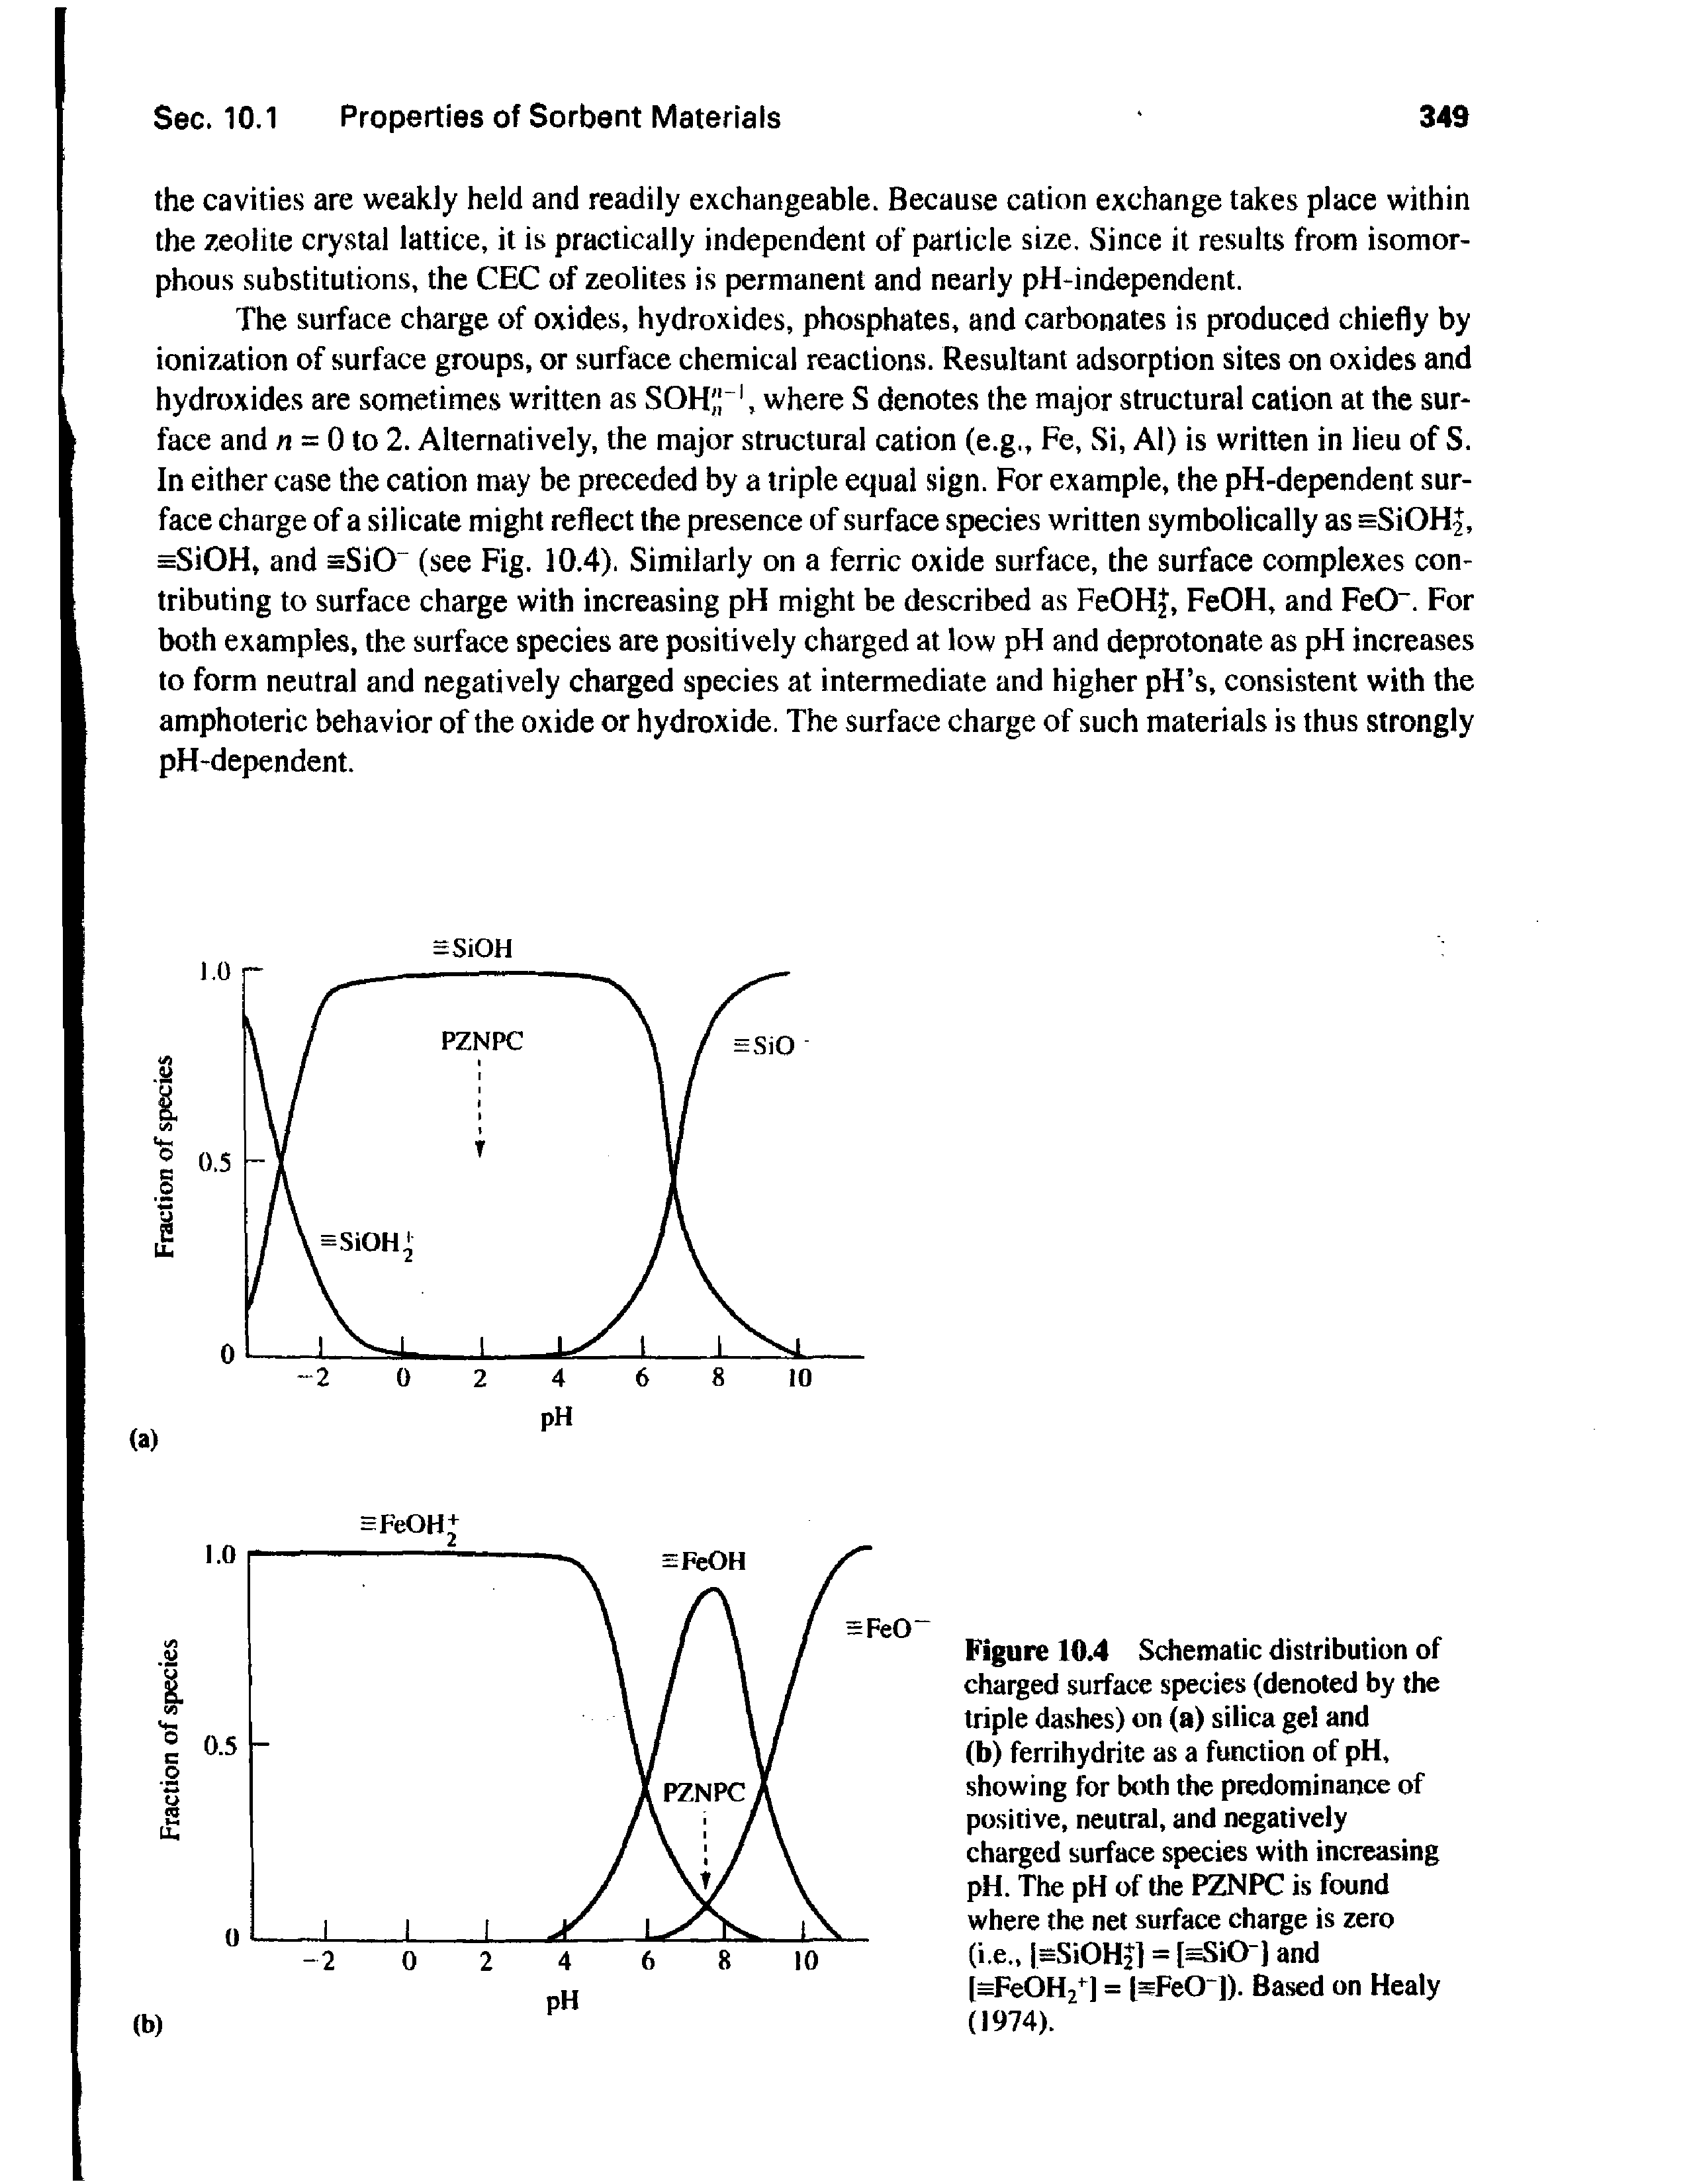 Figure 10.4 Schematic distribution of charged surface species (denoted by the triple dashes) on (a) silica gel and (b) ferrihydrite as a function of pH, showing for both the predominance of positive, neutral, and negatively charged surface species with increasing pH. The pH of the PZNPC is found where the net surface charge is zero (i.e., i=SiOHJl = [sSiO J and [sFeOHj l = IsFeO ]). Based on Healy (1974).